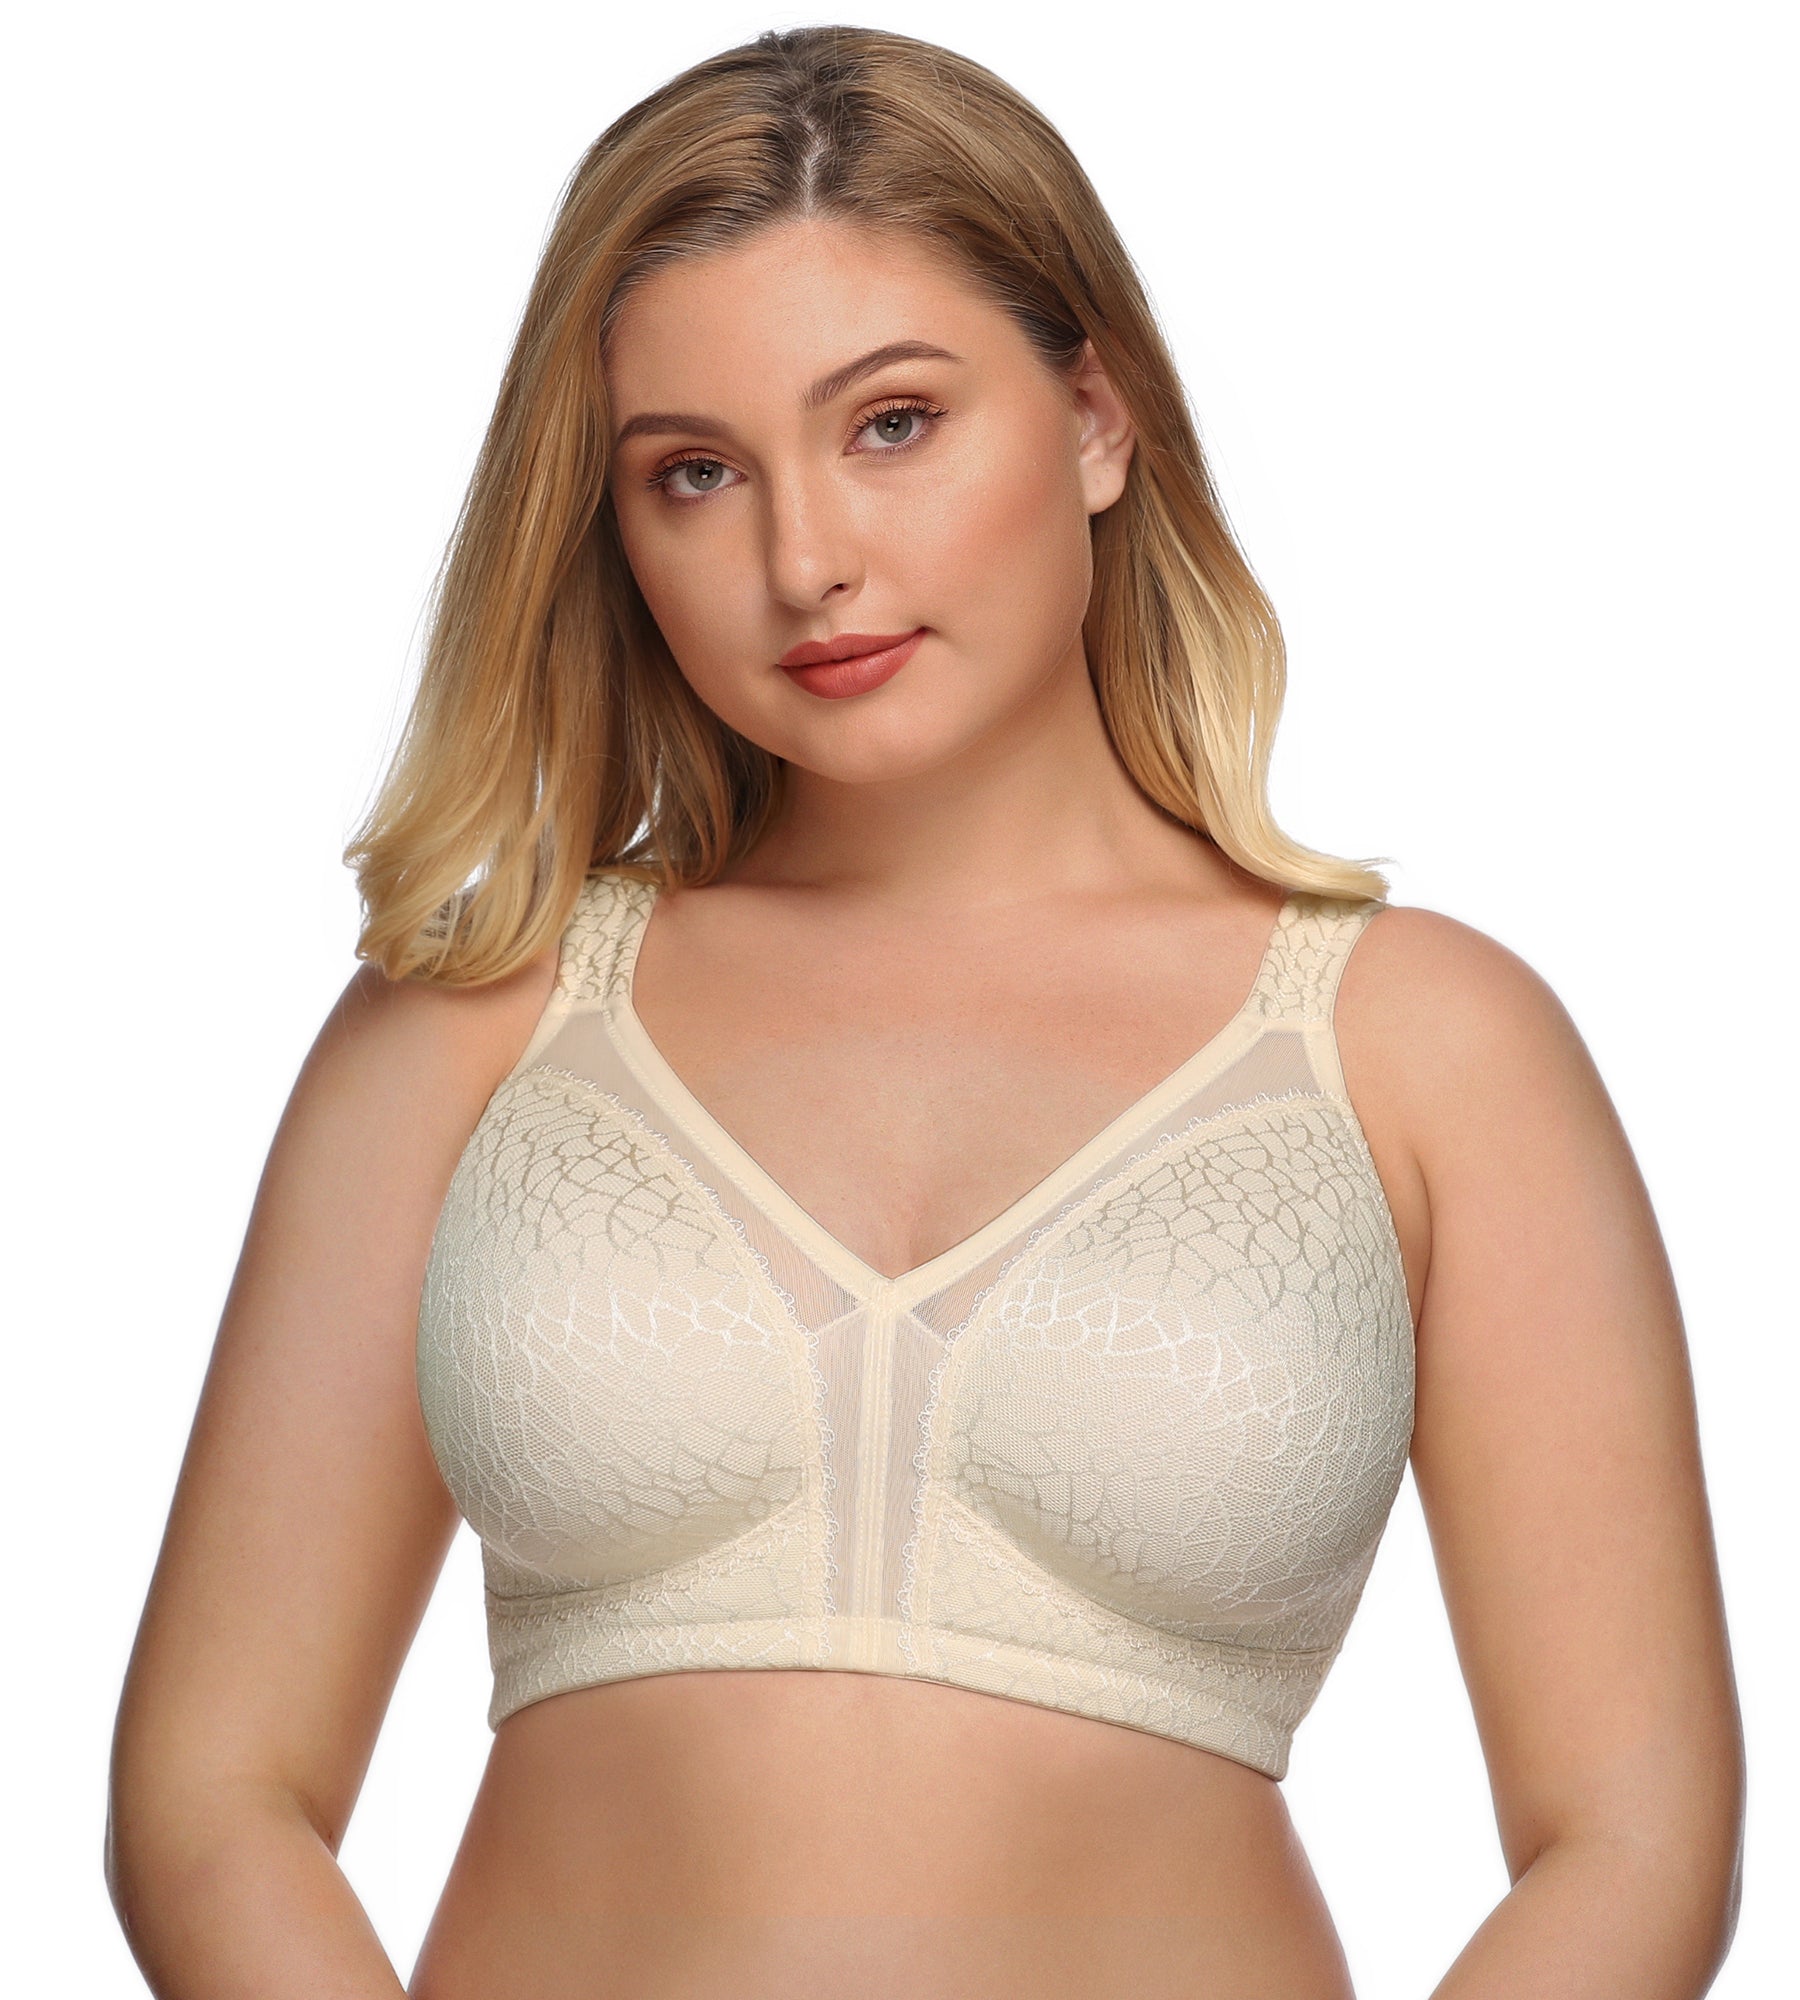 Padded 521 Net Tube Bra, Multi Colour, Size: Free Sizes at Rs 85